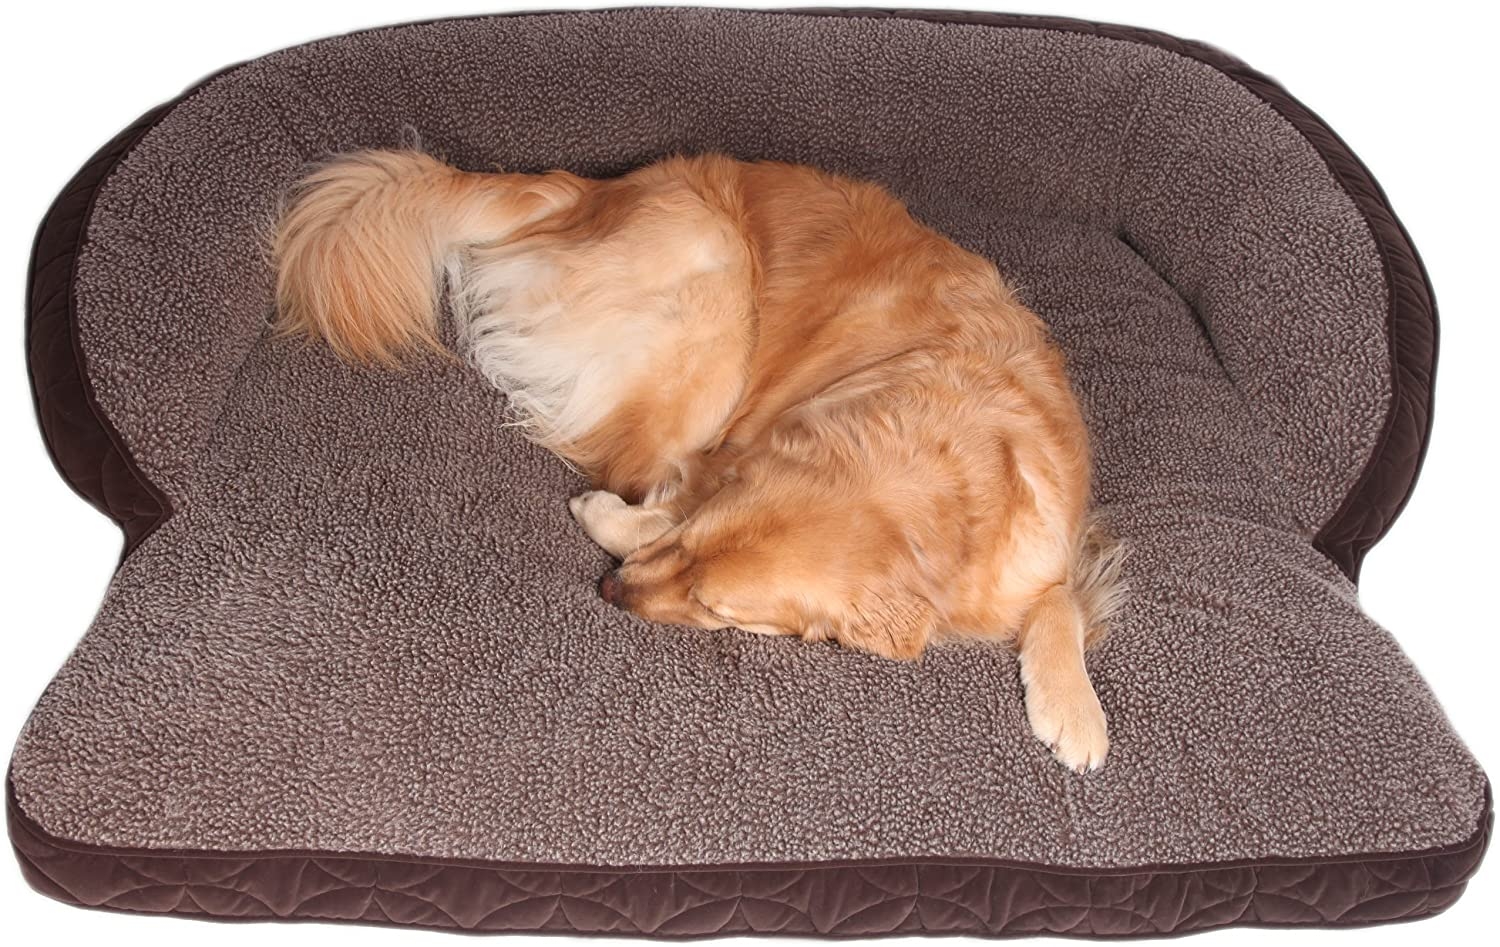 Floppy Ears Design Microfiber and Fleece Surround Bolster Dog Bed, Large Size (for Large Dogs), 48" x 36", Chocolate